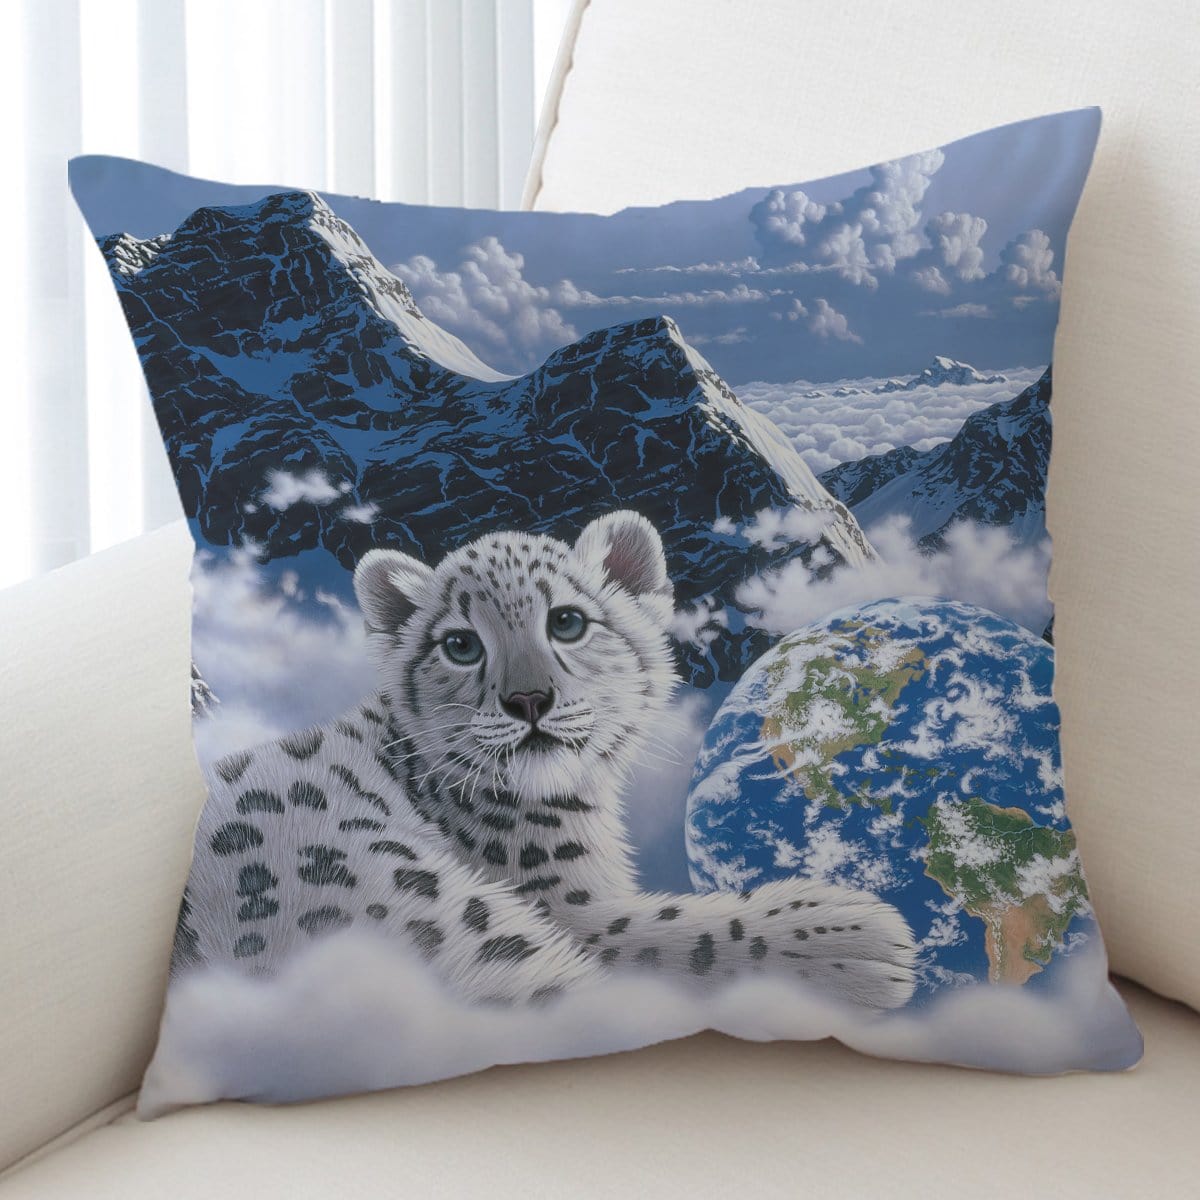 Schim Schimmel Bed Of Clouds Cushion Cover